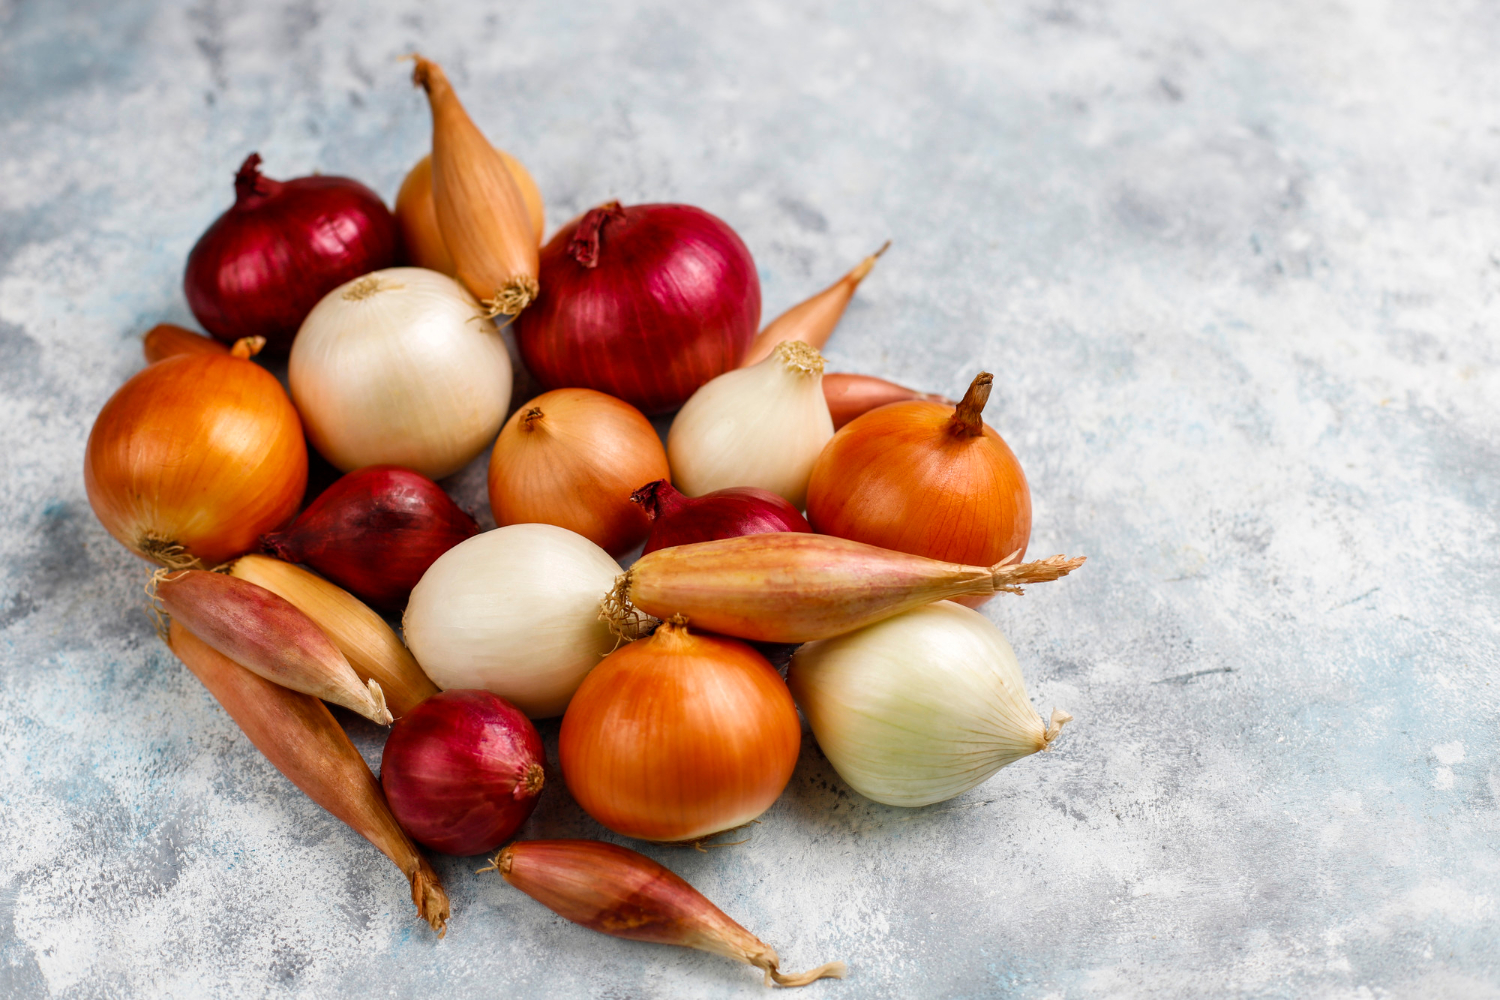 various-types-onions-red-white-yellow-shallot.jpg